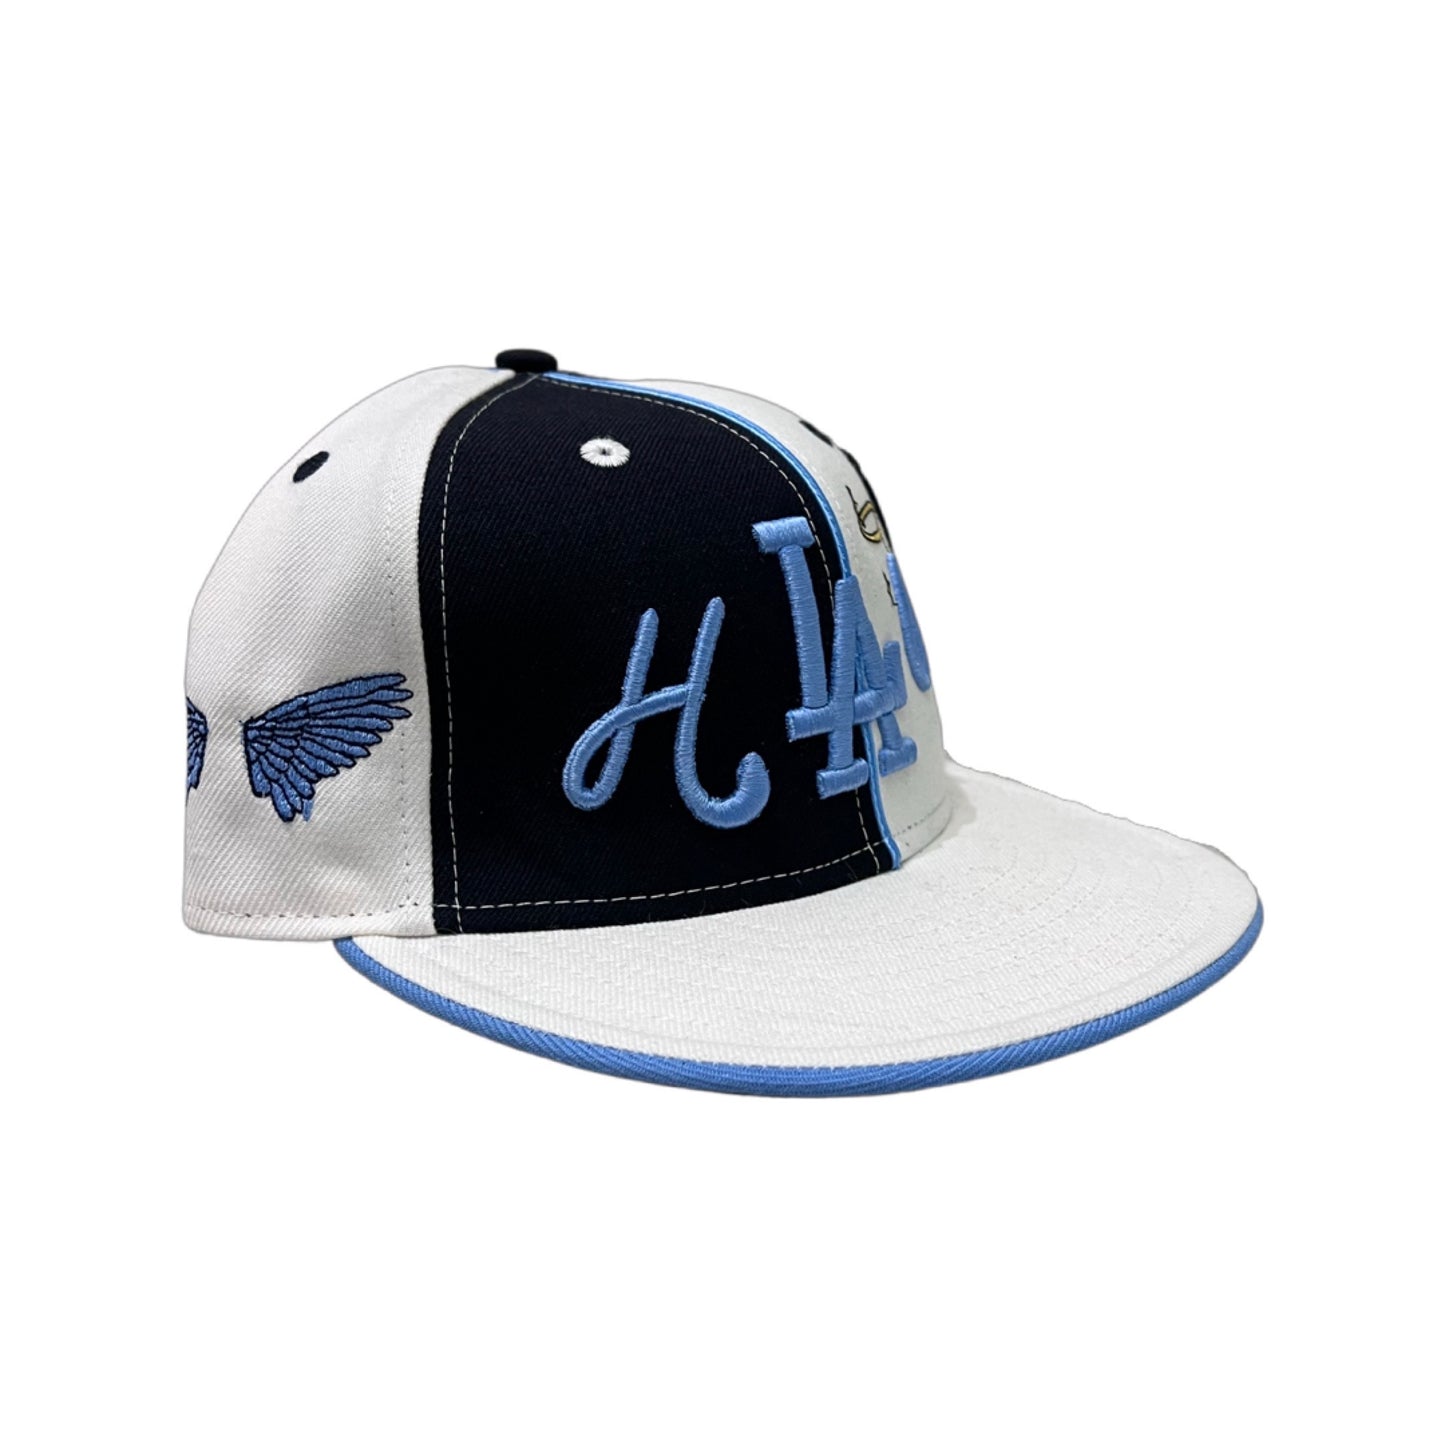 4/12 HALO FITTED HAT SIZE 7 1/4